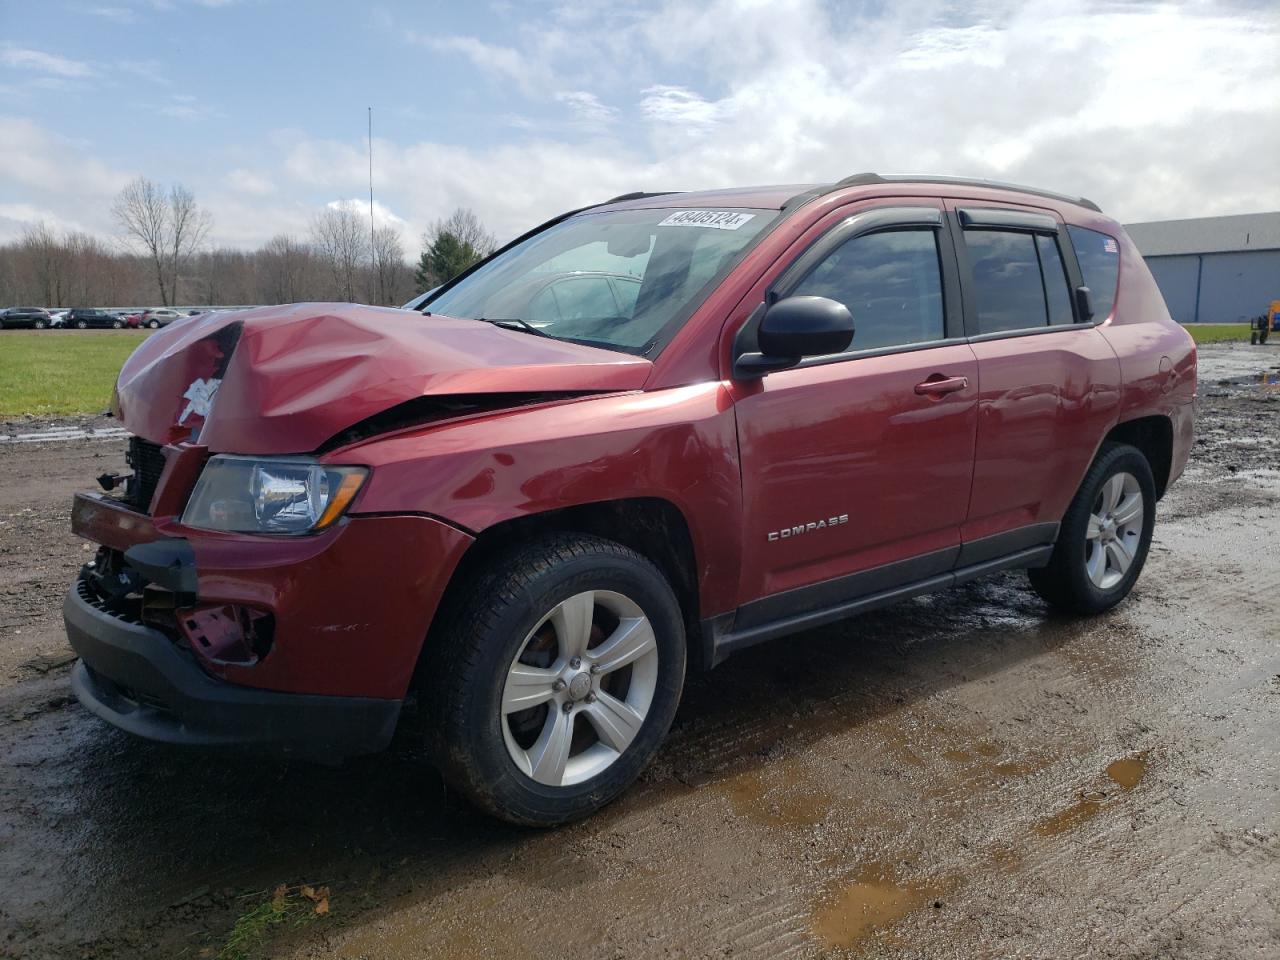 vin: 1C4NJDBB5GD566490 1C4NJDBB5GD566490 2016 jeep compass 2400 for Sale in 44028 9176, Oh - Cleveland West, Columbia Station, Ohio, USA